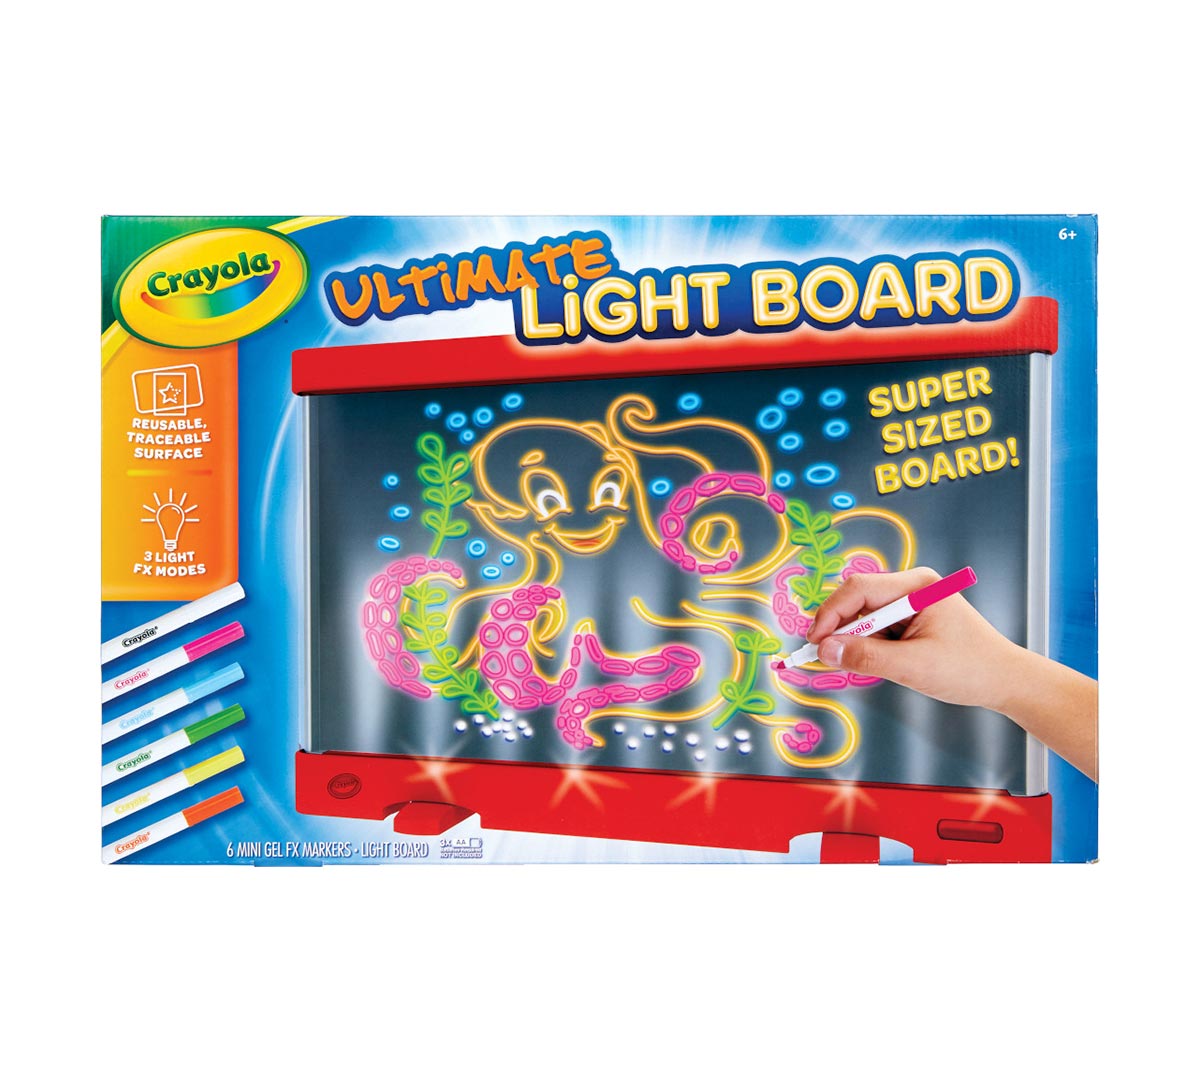 Buy easy to cleaning Crayola LED Light-Up Tracing Pad for friends